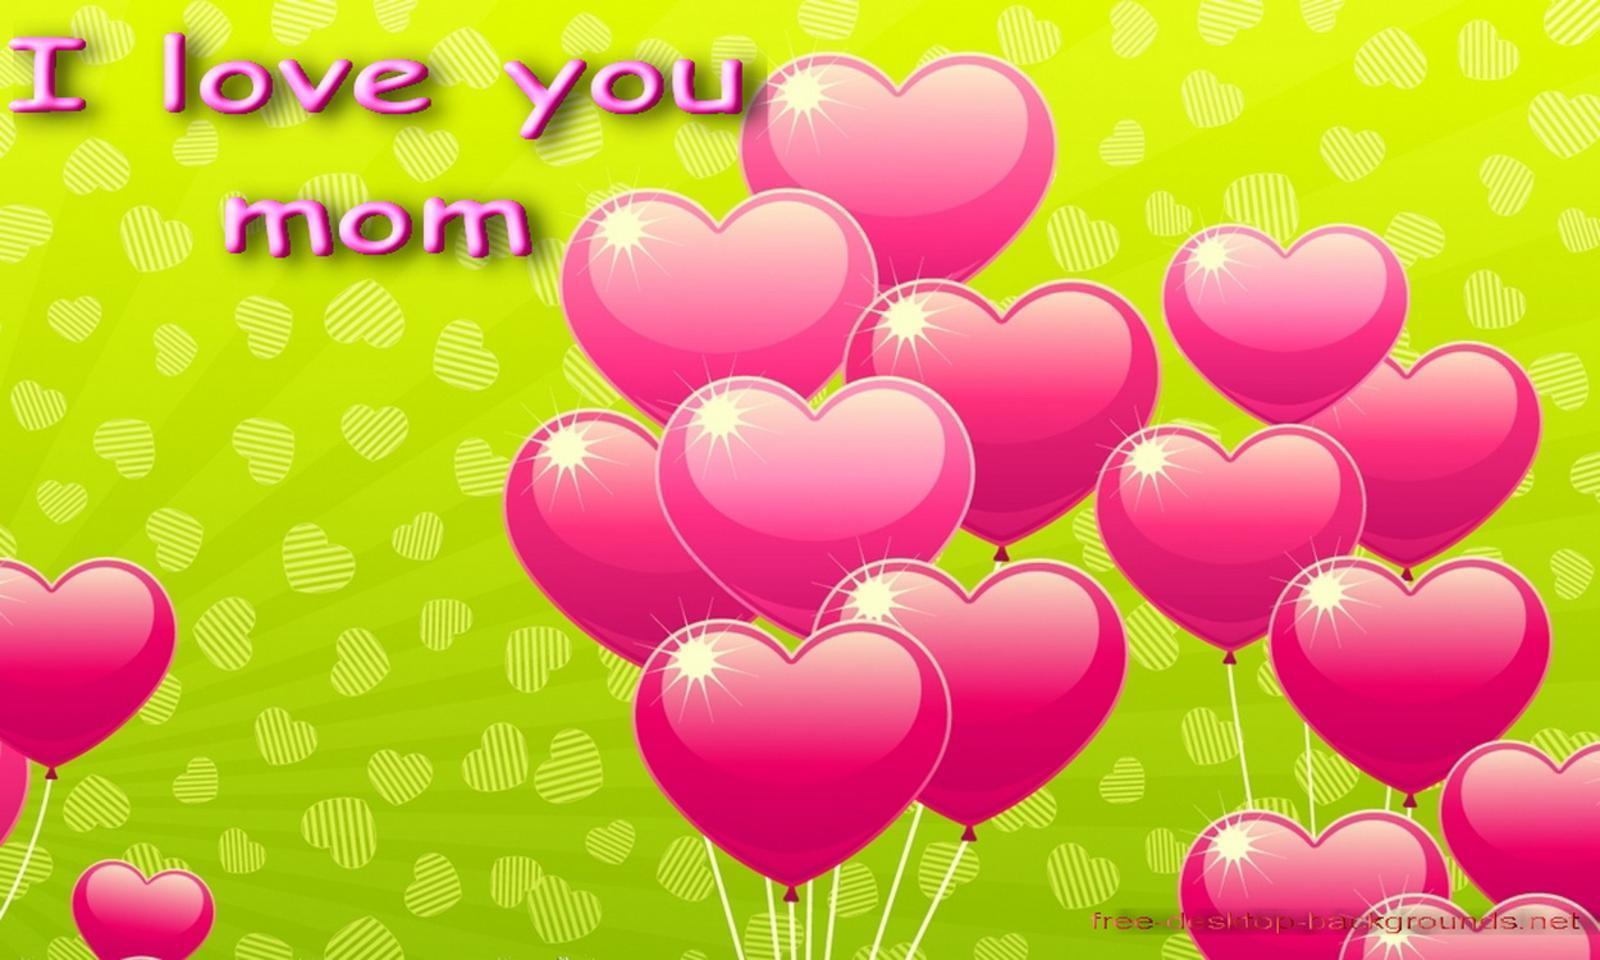 I love you mom happy mothers day free desktop background